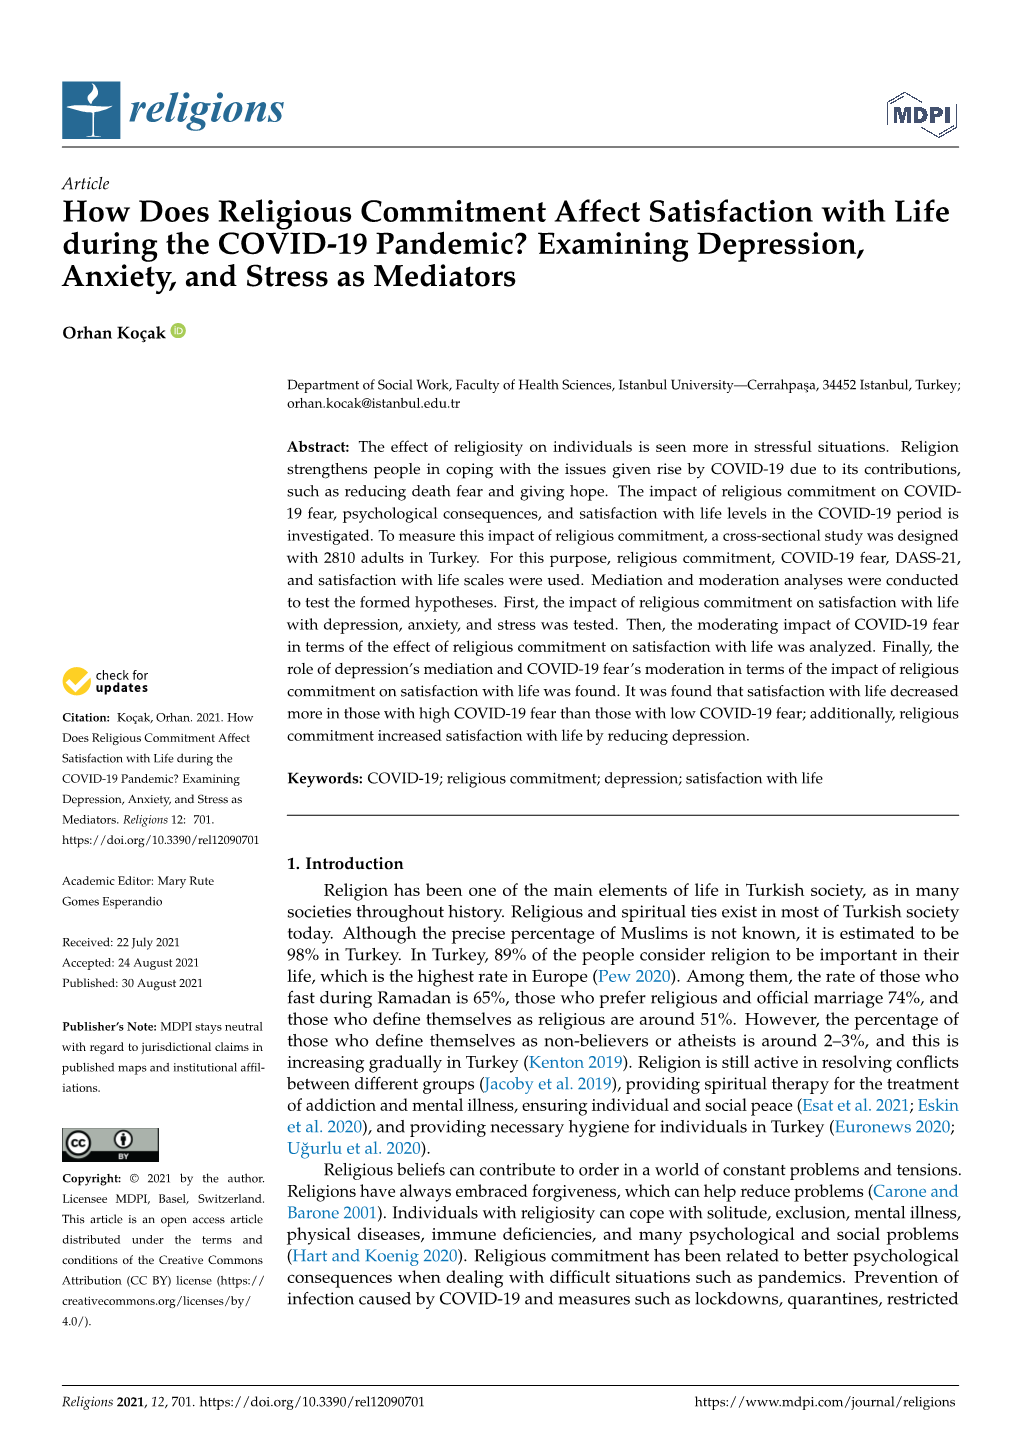 How Does Religious Commitment Affect Satisfaction with Life During the COVID-19 Pandemic? Examining Depression, Anxiety, and Stress As Mediators